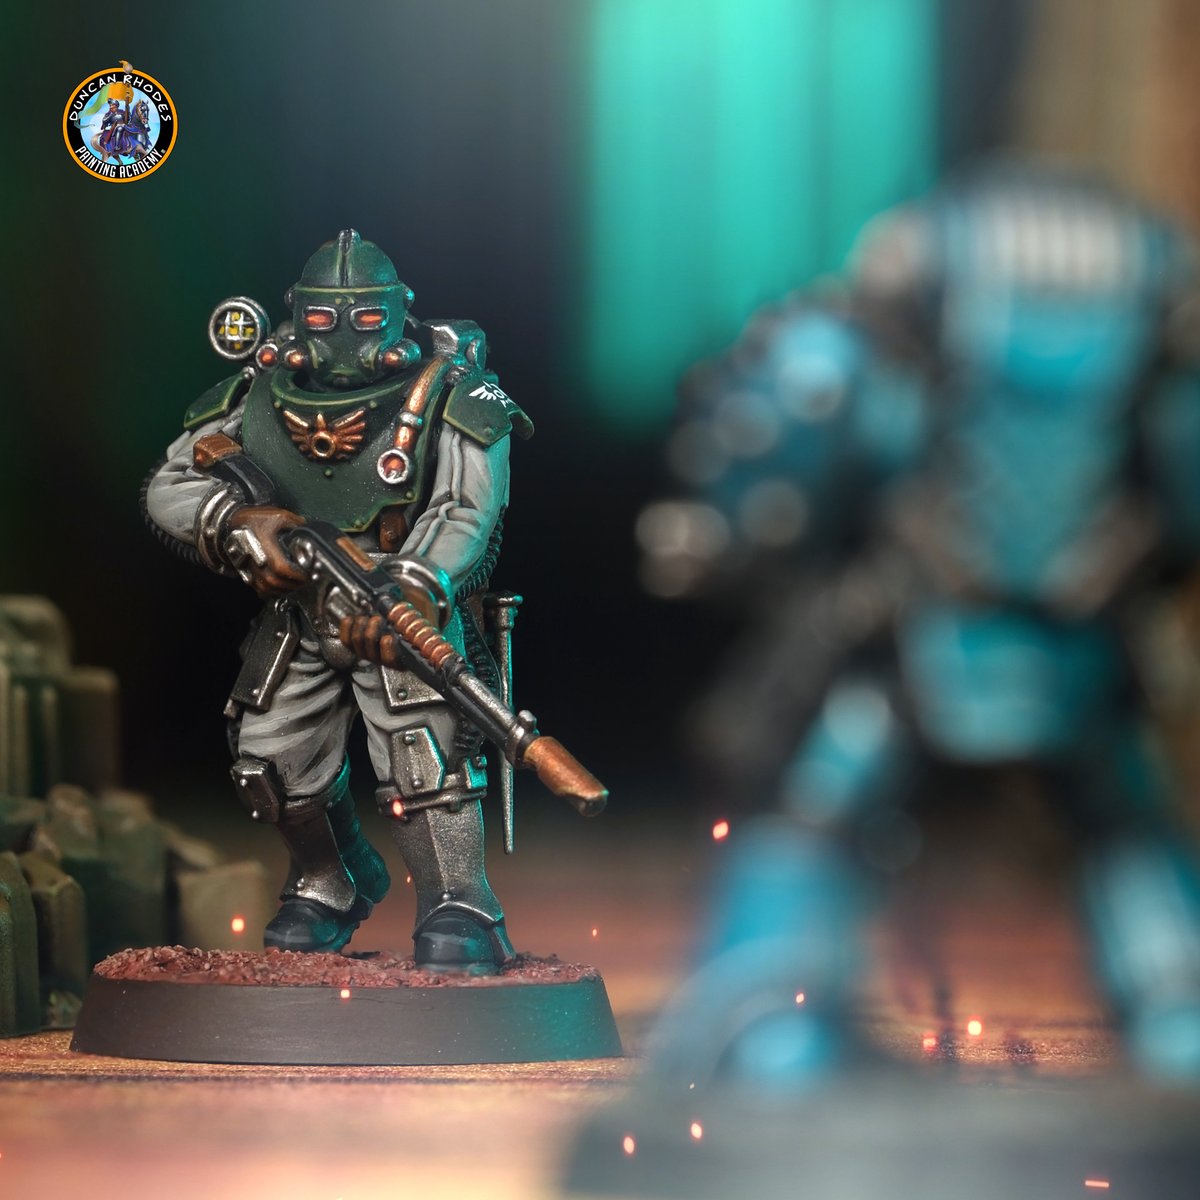 New Video marching into the DRPA this week! Solar Auxilia are fantastic miniatures and frankly, I could not resist the chance to get some paint on them. Check it out tomorrow at the Duncan Rhodes Painting Academy site. #twothincoatsdrpa #twothincoats #DRPA #horusheresy